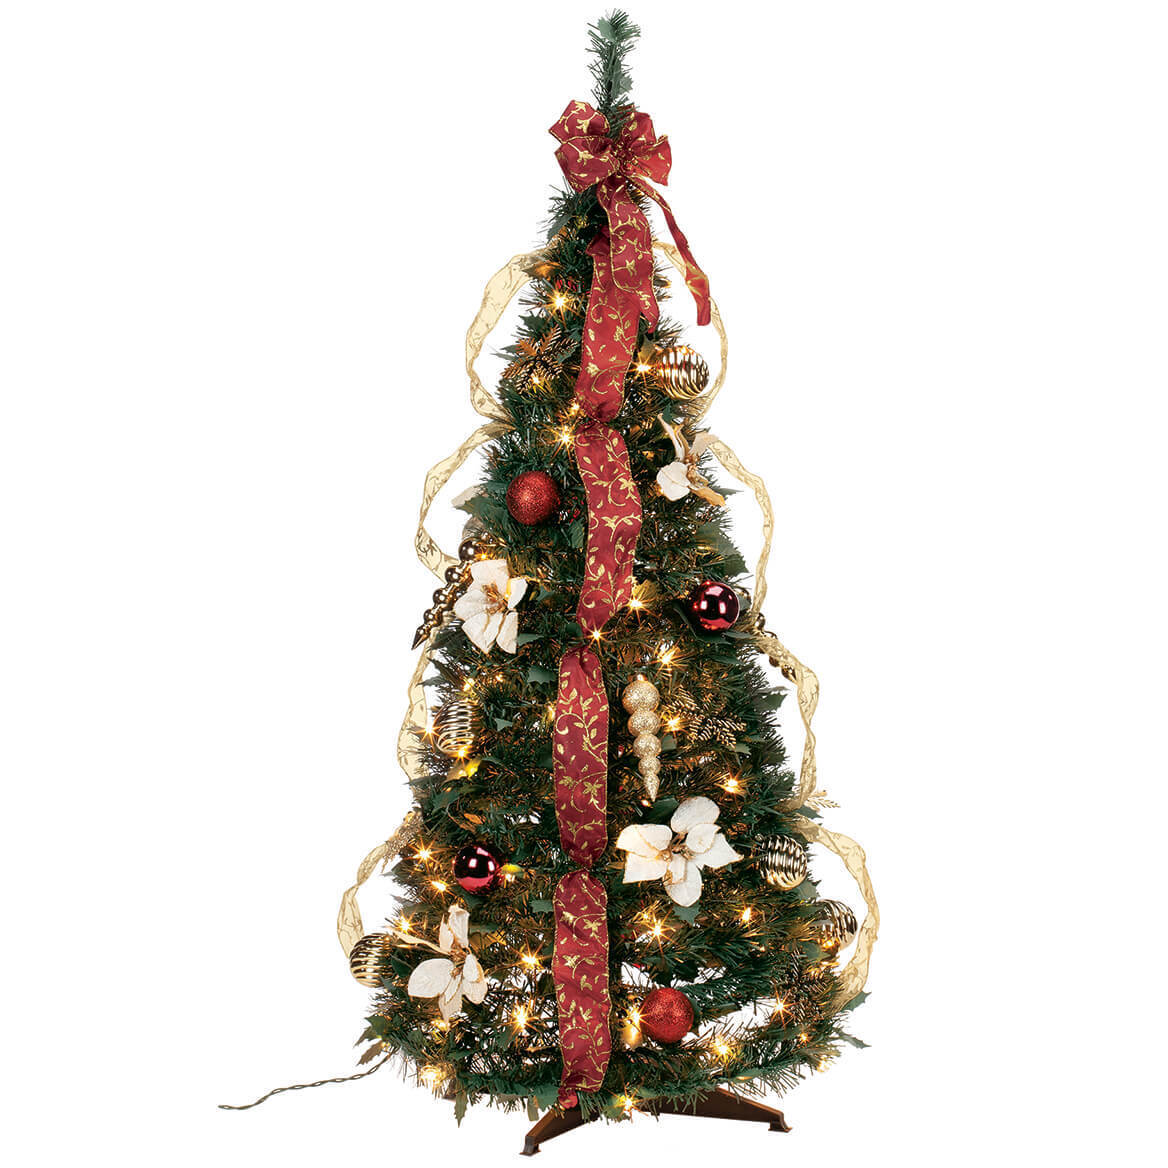 4' Burgundy & Gold Victorian Pull-Up Tree by Holiday PeakTM